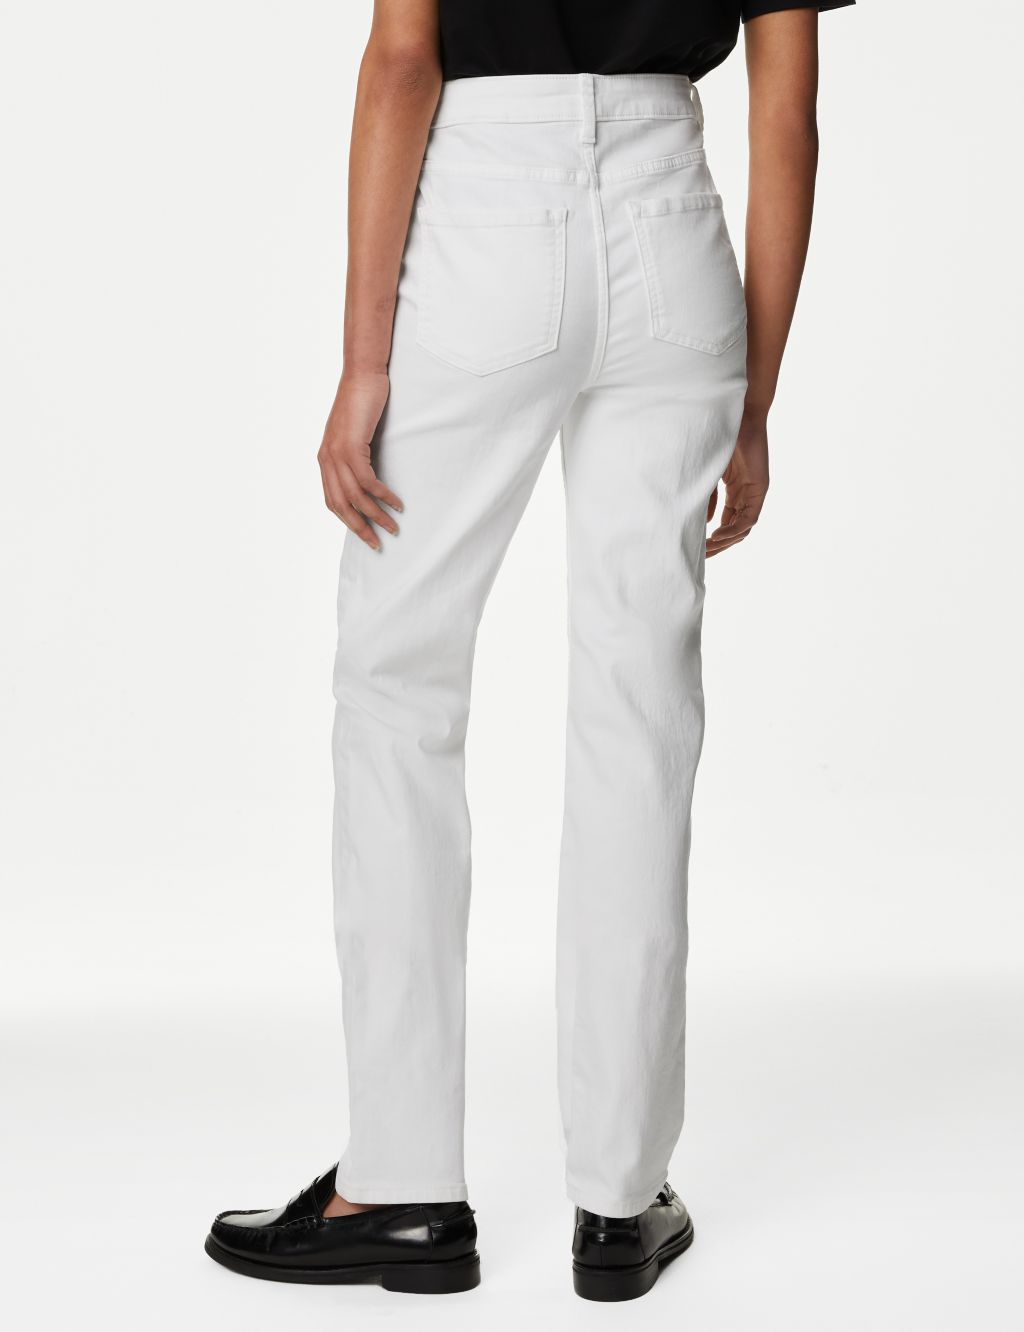 Sienna Straight Leg Jeans with Stretch image 4